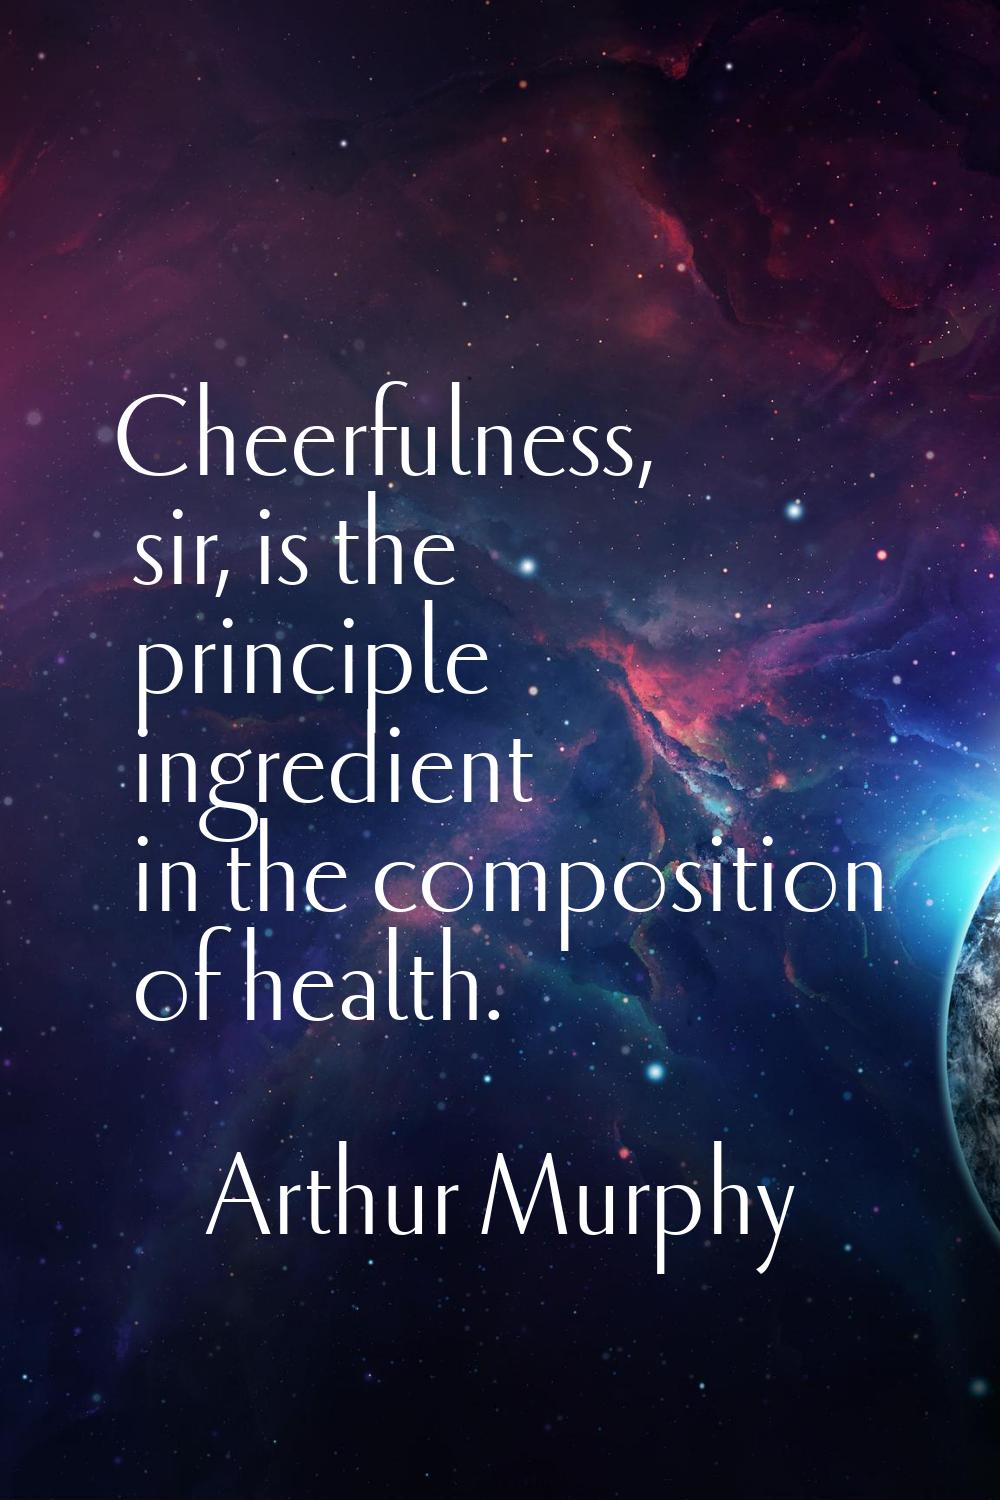 Cheerfulness, sir, is the principle ingredient in the composition of health.